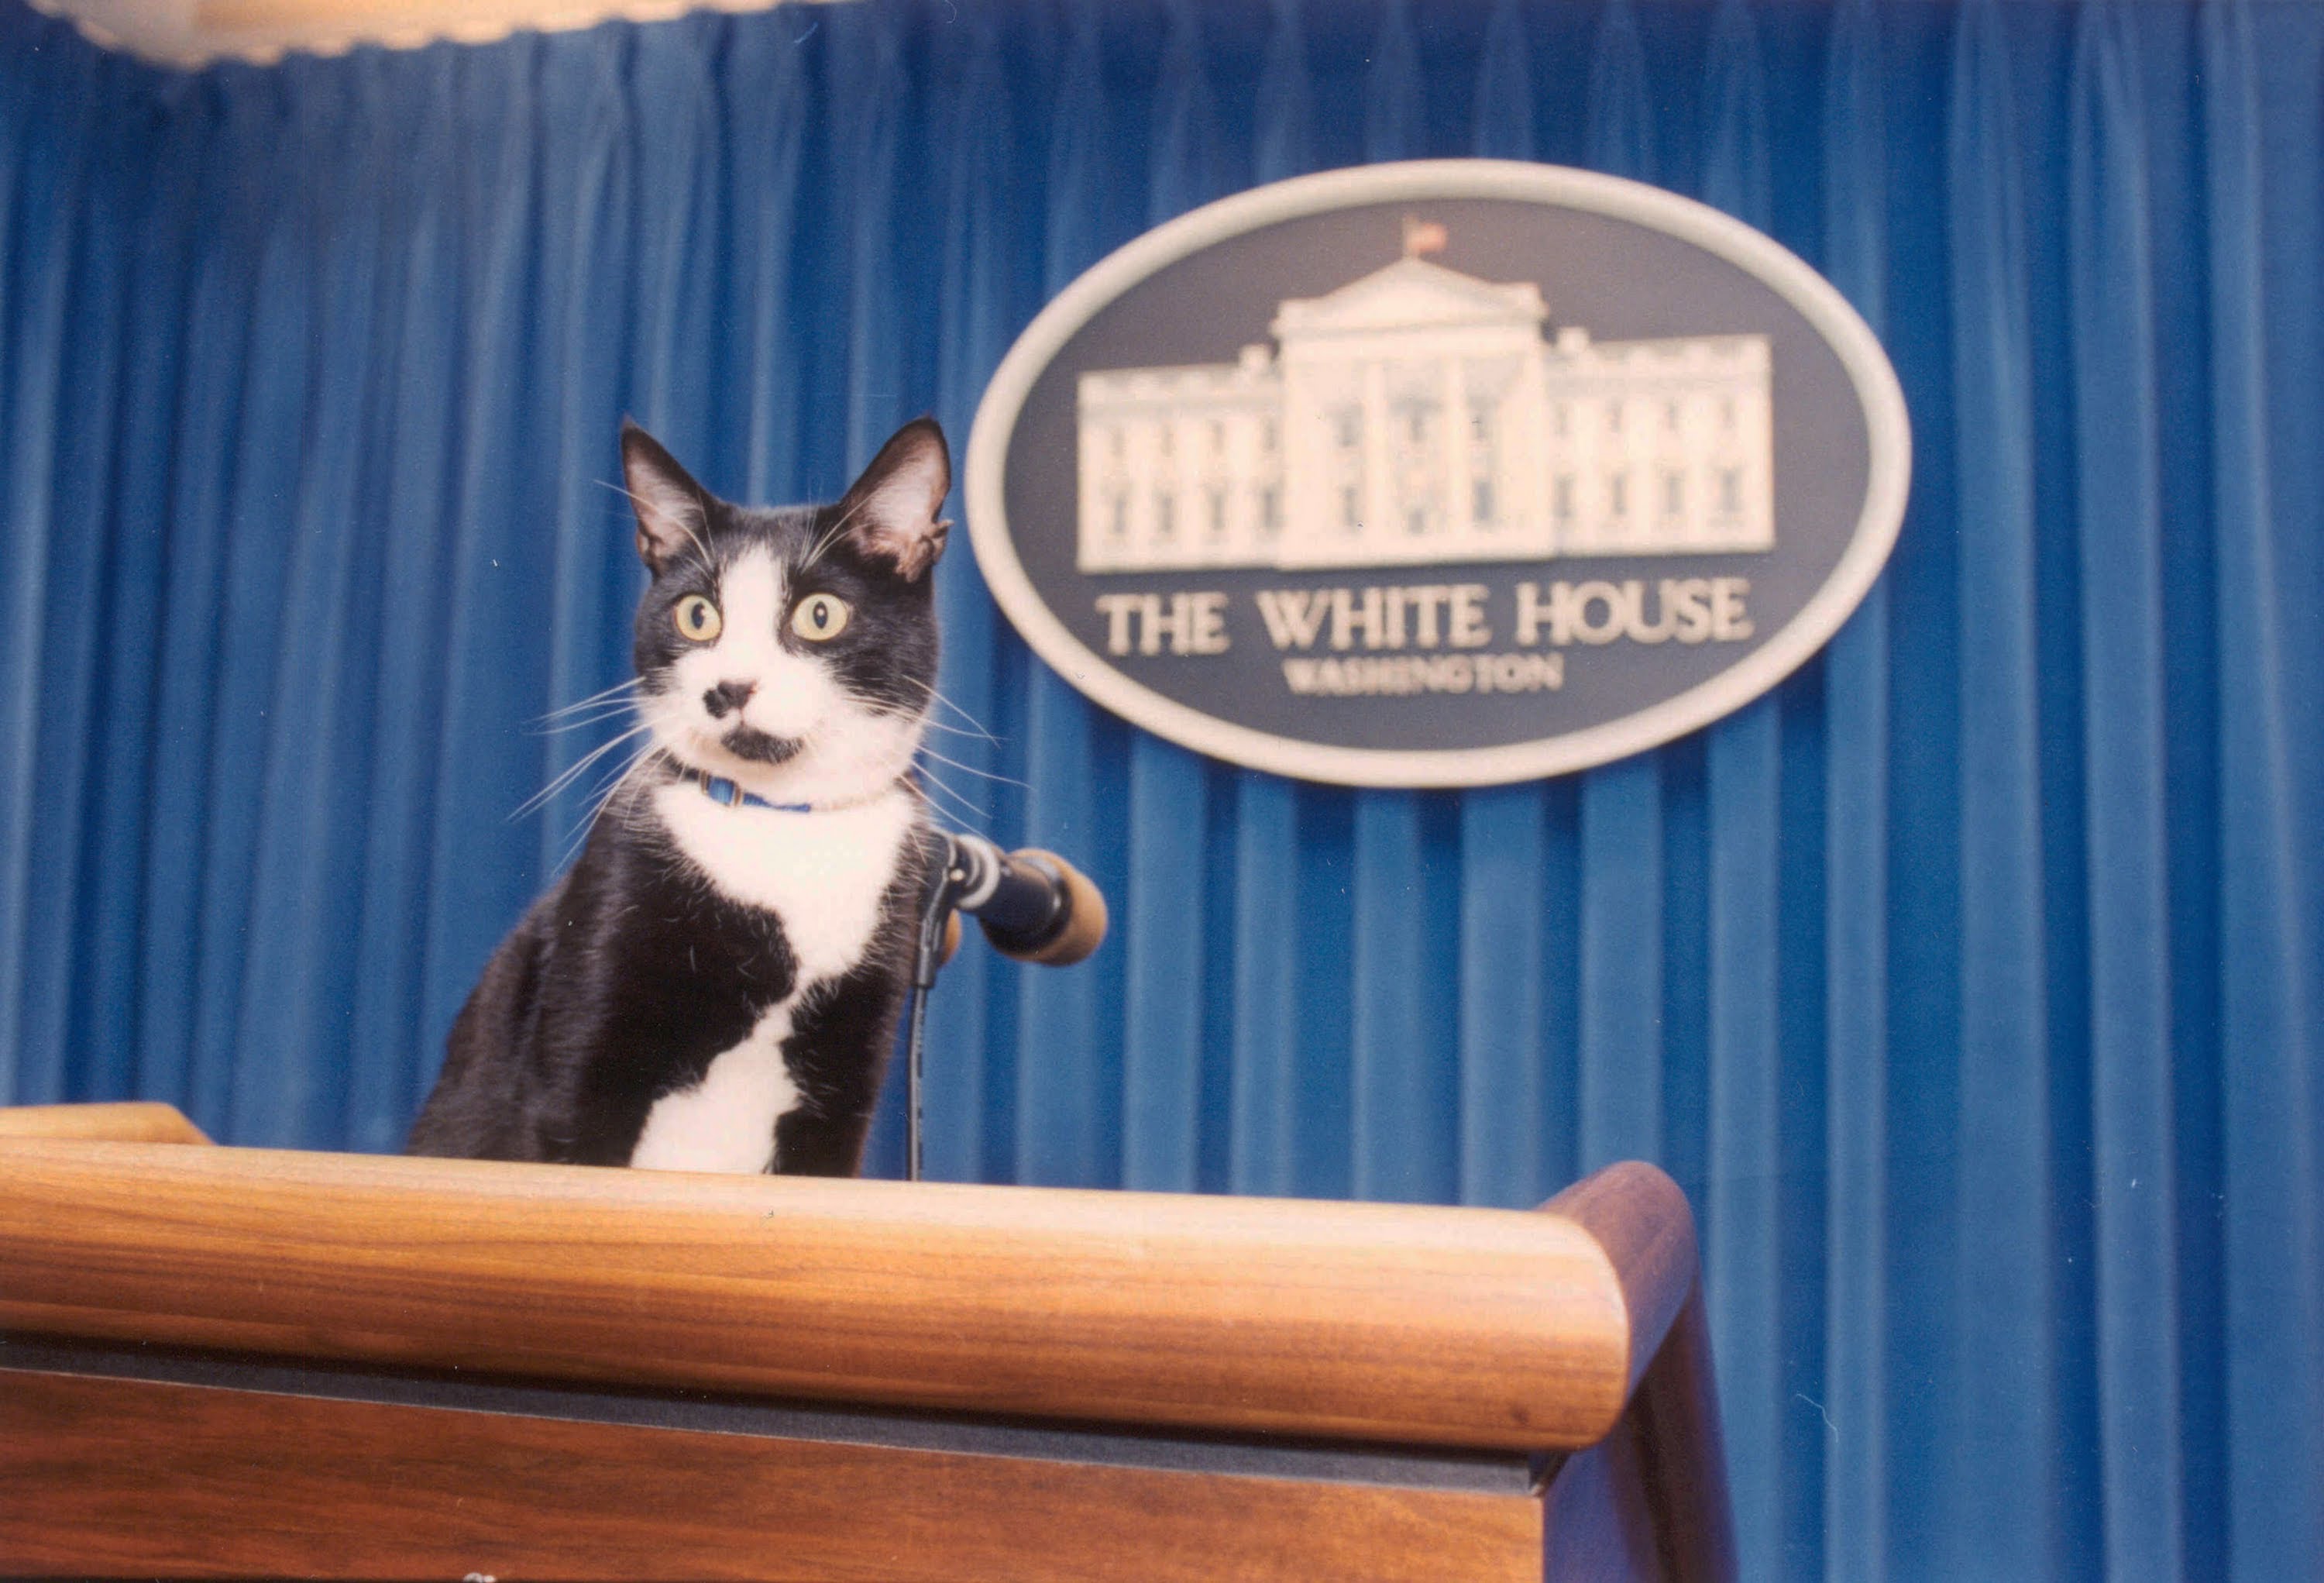 Socks, the Clinton family's cat, prepares for a Museum Cats White ...